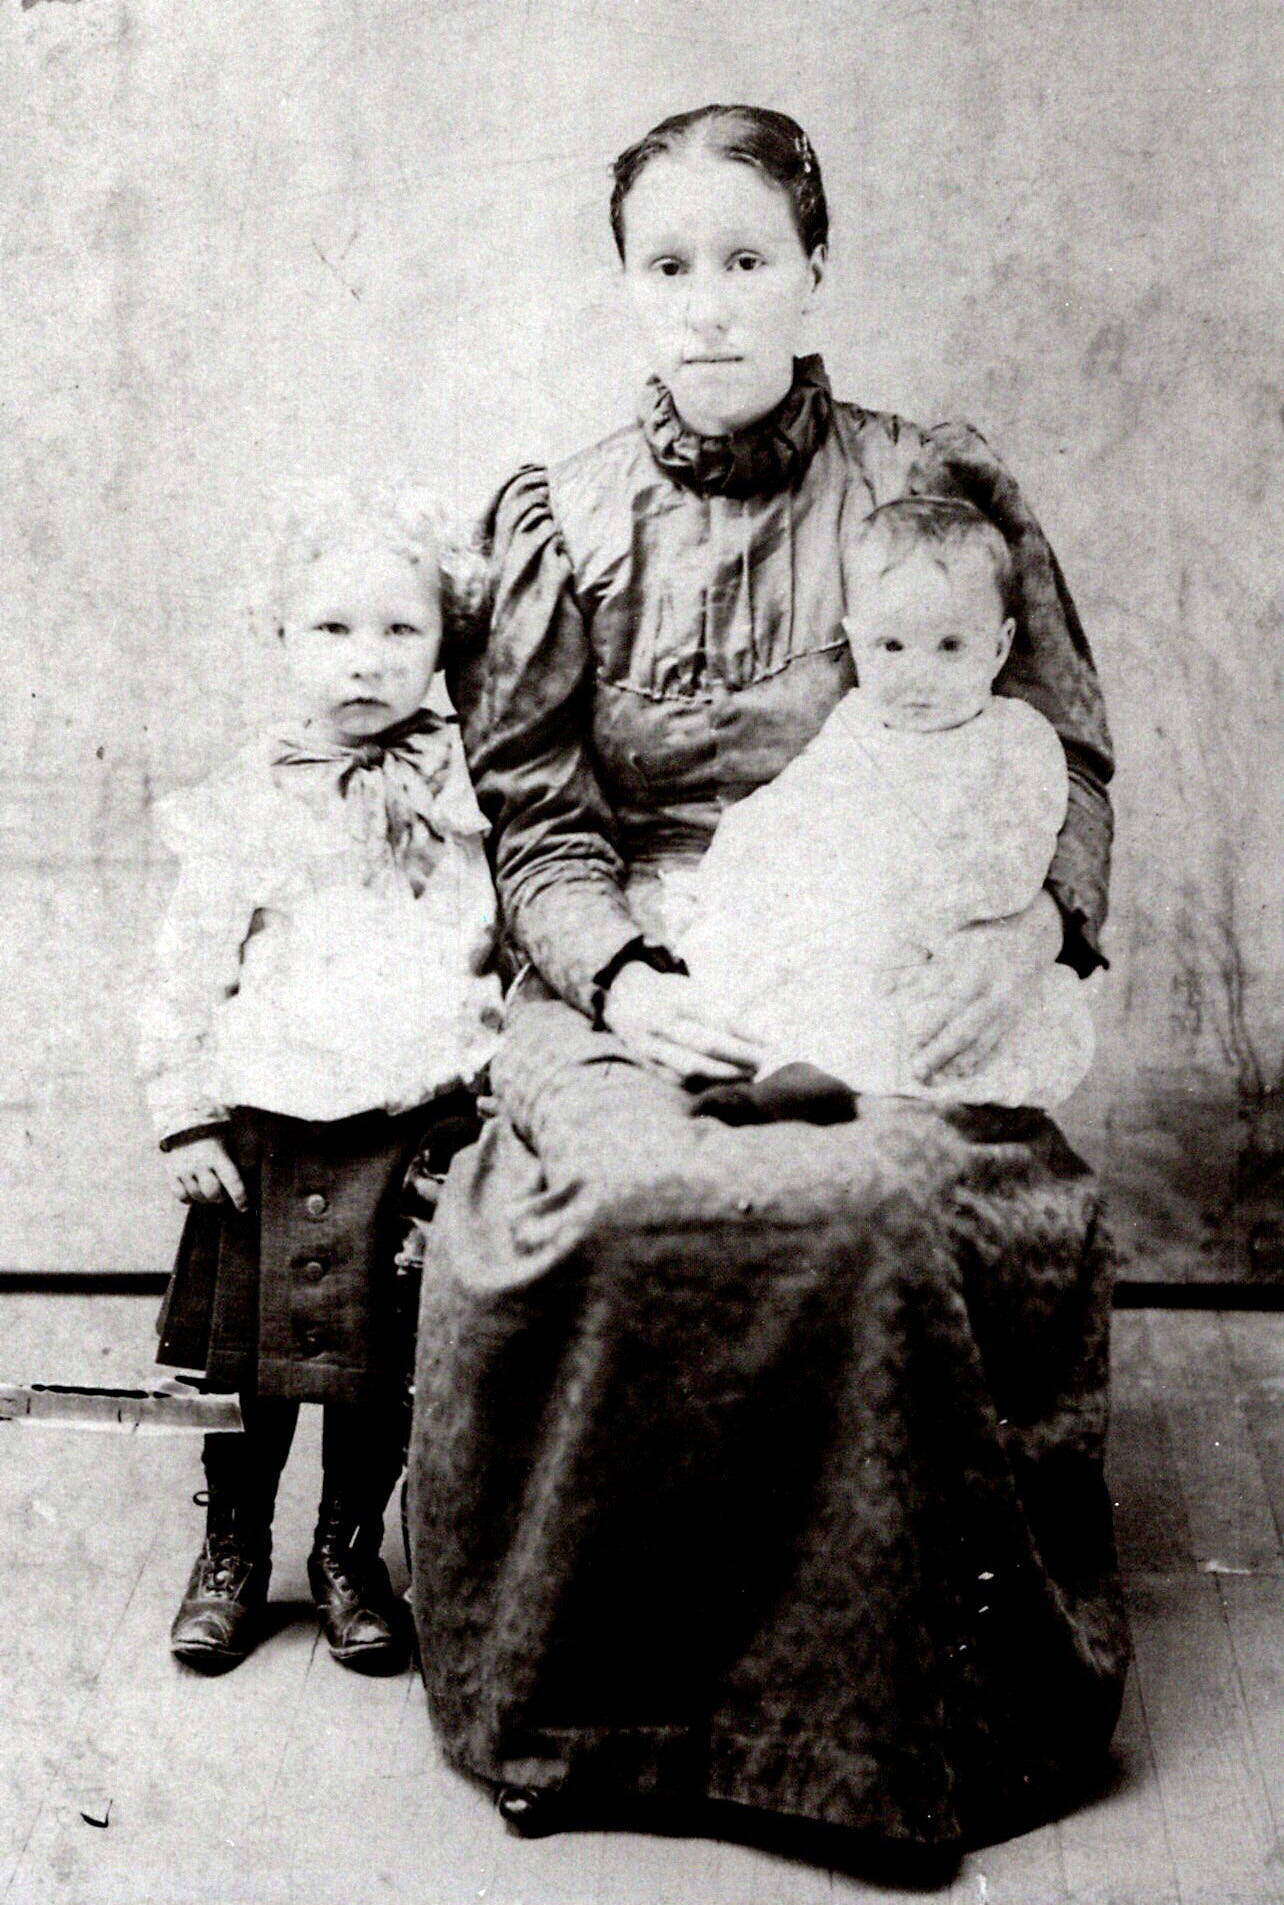 Photo courtesy of the Brennan Family Collection
This 1901 photo shows May King with her two eldest children, Floyd (standing) and Mary (on May’s lap).